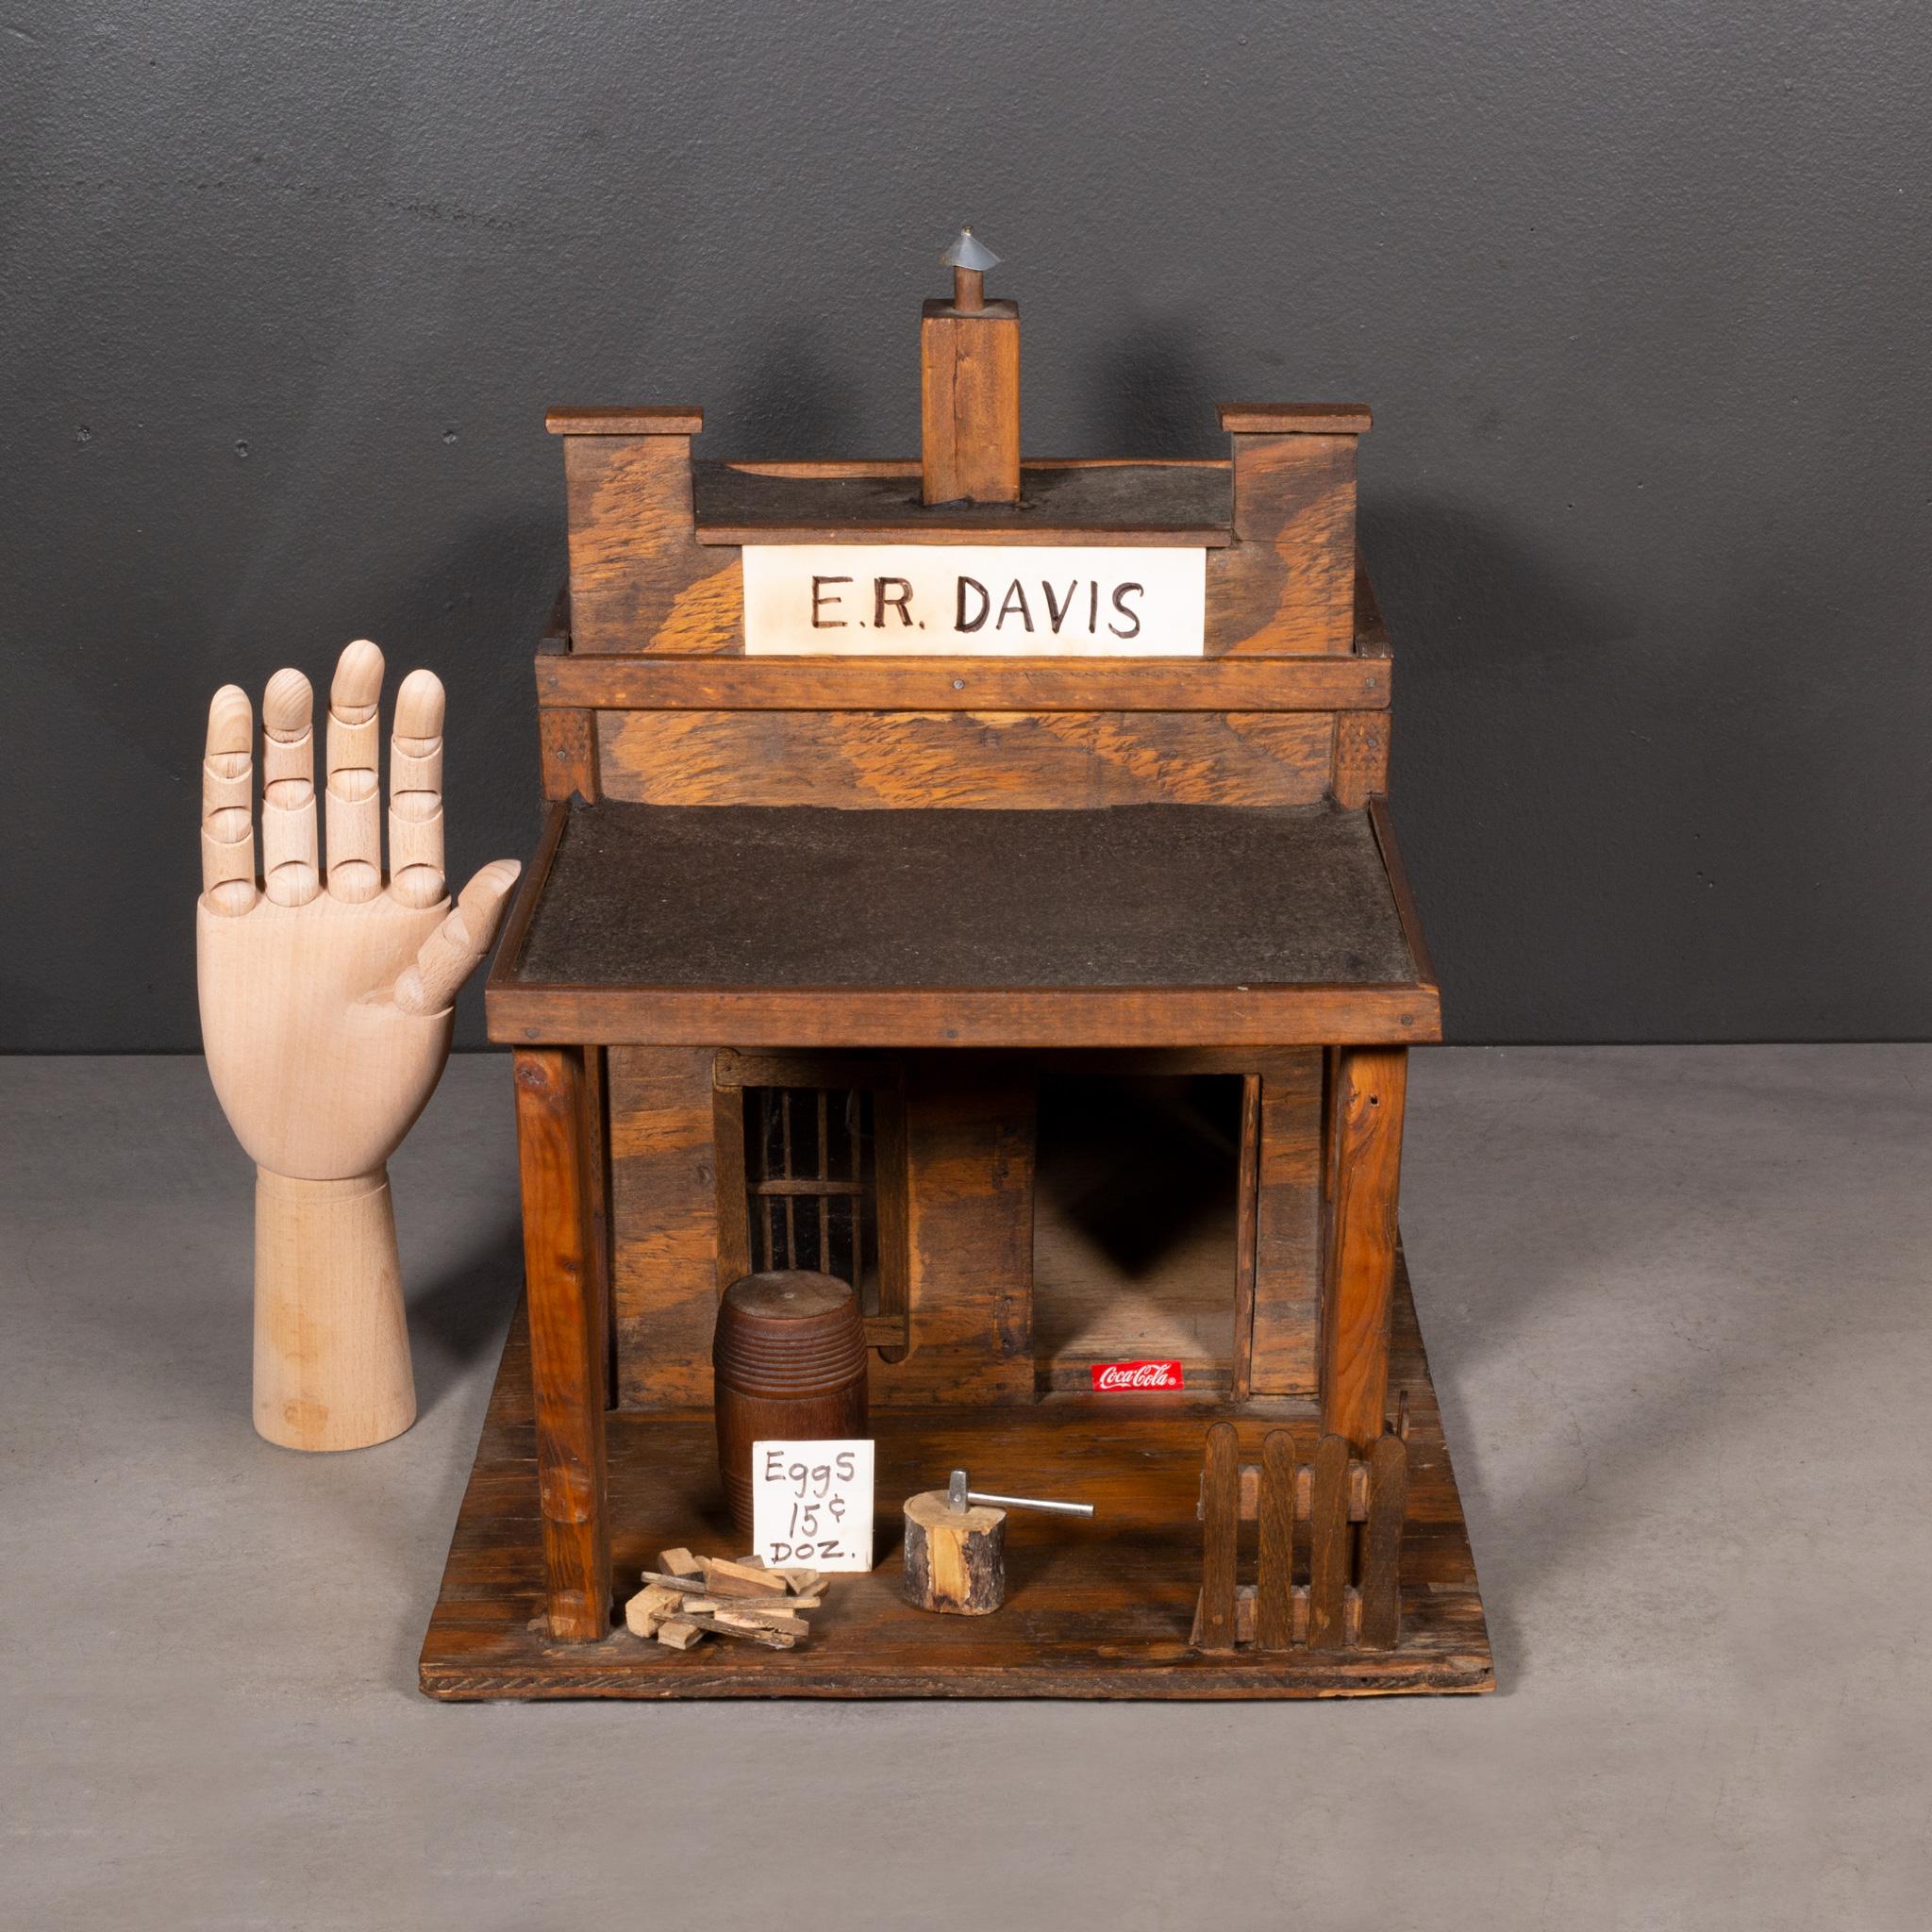 ABOUT

Contact us for more parcel shipping quotes: S16 Home San Francisco. 

A handmade general store wooden folk art model with some accessories. Single story with front porch. Paper sign on facade.

Shown with life size hand model.

    CREATOR